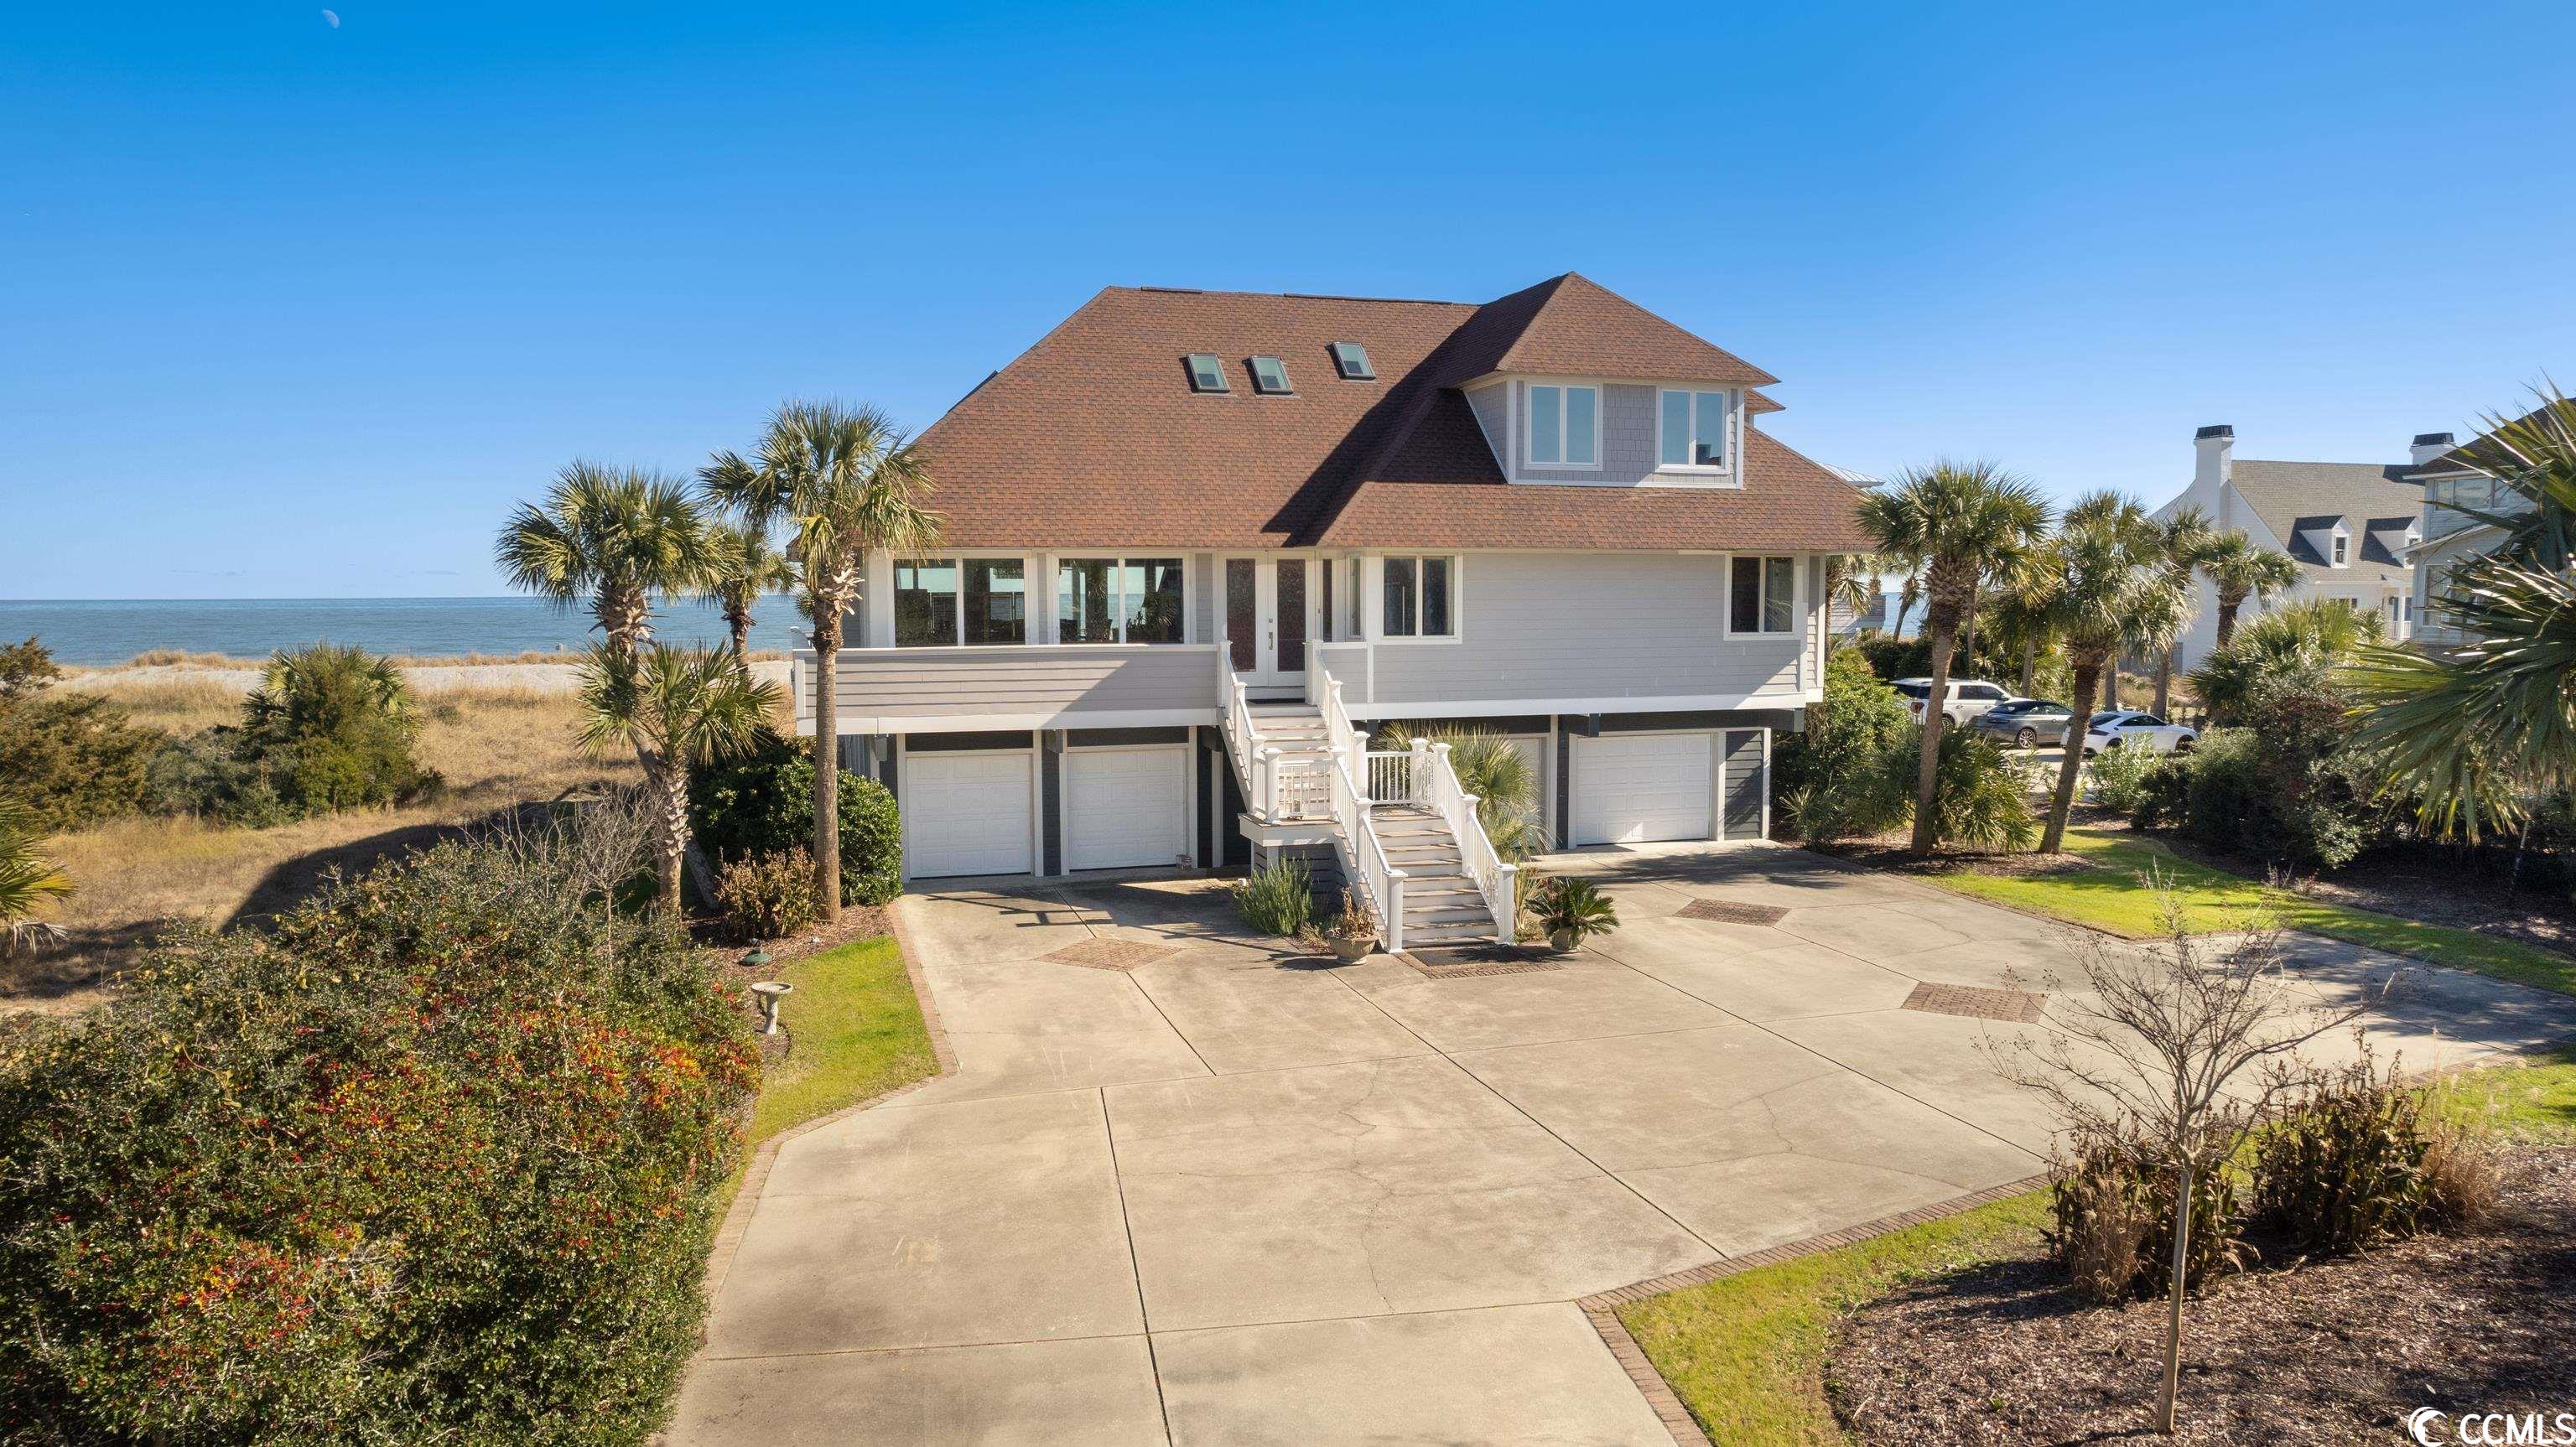 welcome to easy oceanfront living in the heart of debordieu colony. 1367 debordieu blvd. exudes coastal charm with 5 bedrooms, 4 bathrooms and expansive oceanfront views. enjoy the large back  deck with composite decking, the meticulously maintained interior, and the enduring quality of new cement fiber siding. the first floor features an open kitchen/den/dining area  as well as the primary bedroom with its own private deck to take in the sunrise each morning. there are three bedrooms on the second level and a flex space ideal for a second den, an office or workout space where your guests are sure to appreciate a comfortable respite when not enjoying the beach or the many amenities debordieu has to offer. this home seamlessly marries function, comfort, and practicality all while offering the very best of beach front living. debordieu's beach club, golf club, and tennis / recreational amenities are are quick golf cart ride away.